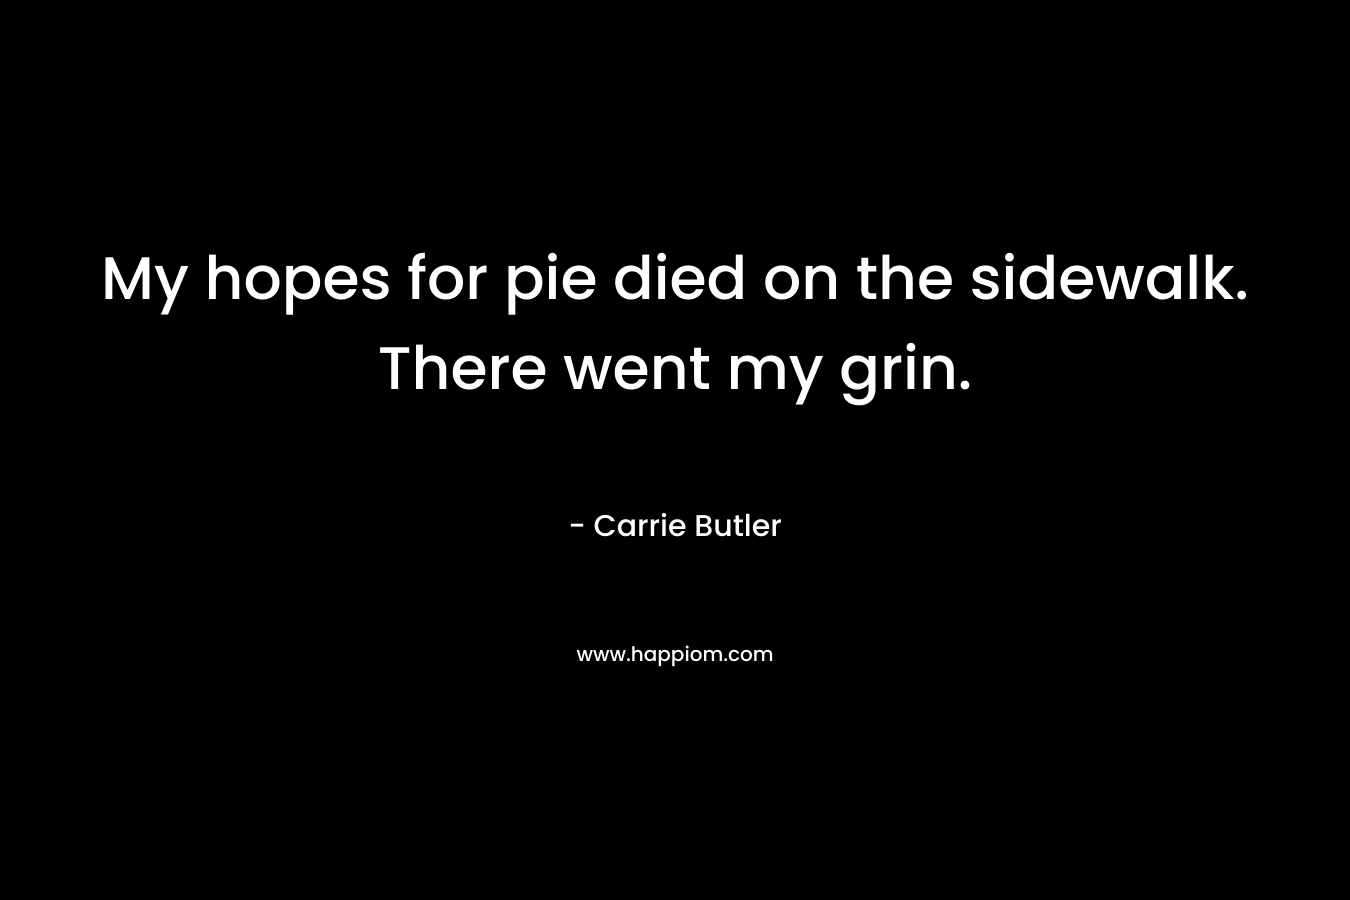 My hopes for pie died on the sidewalk. There went my grin. – Carrie Butler